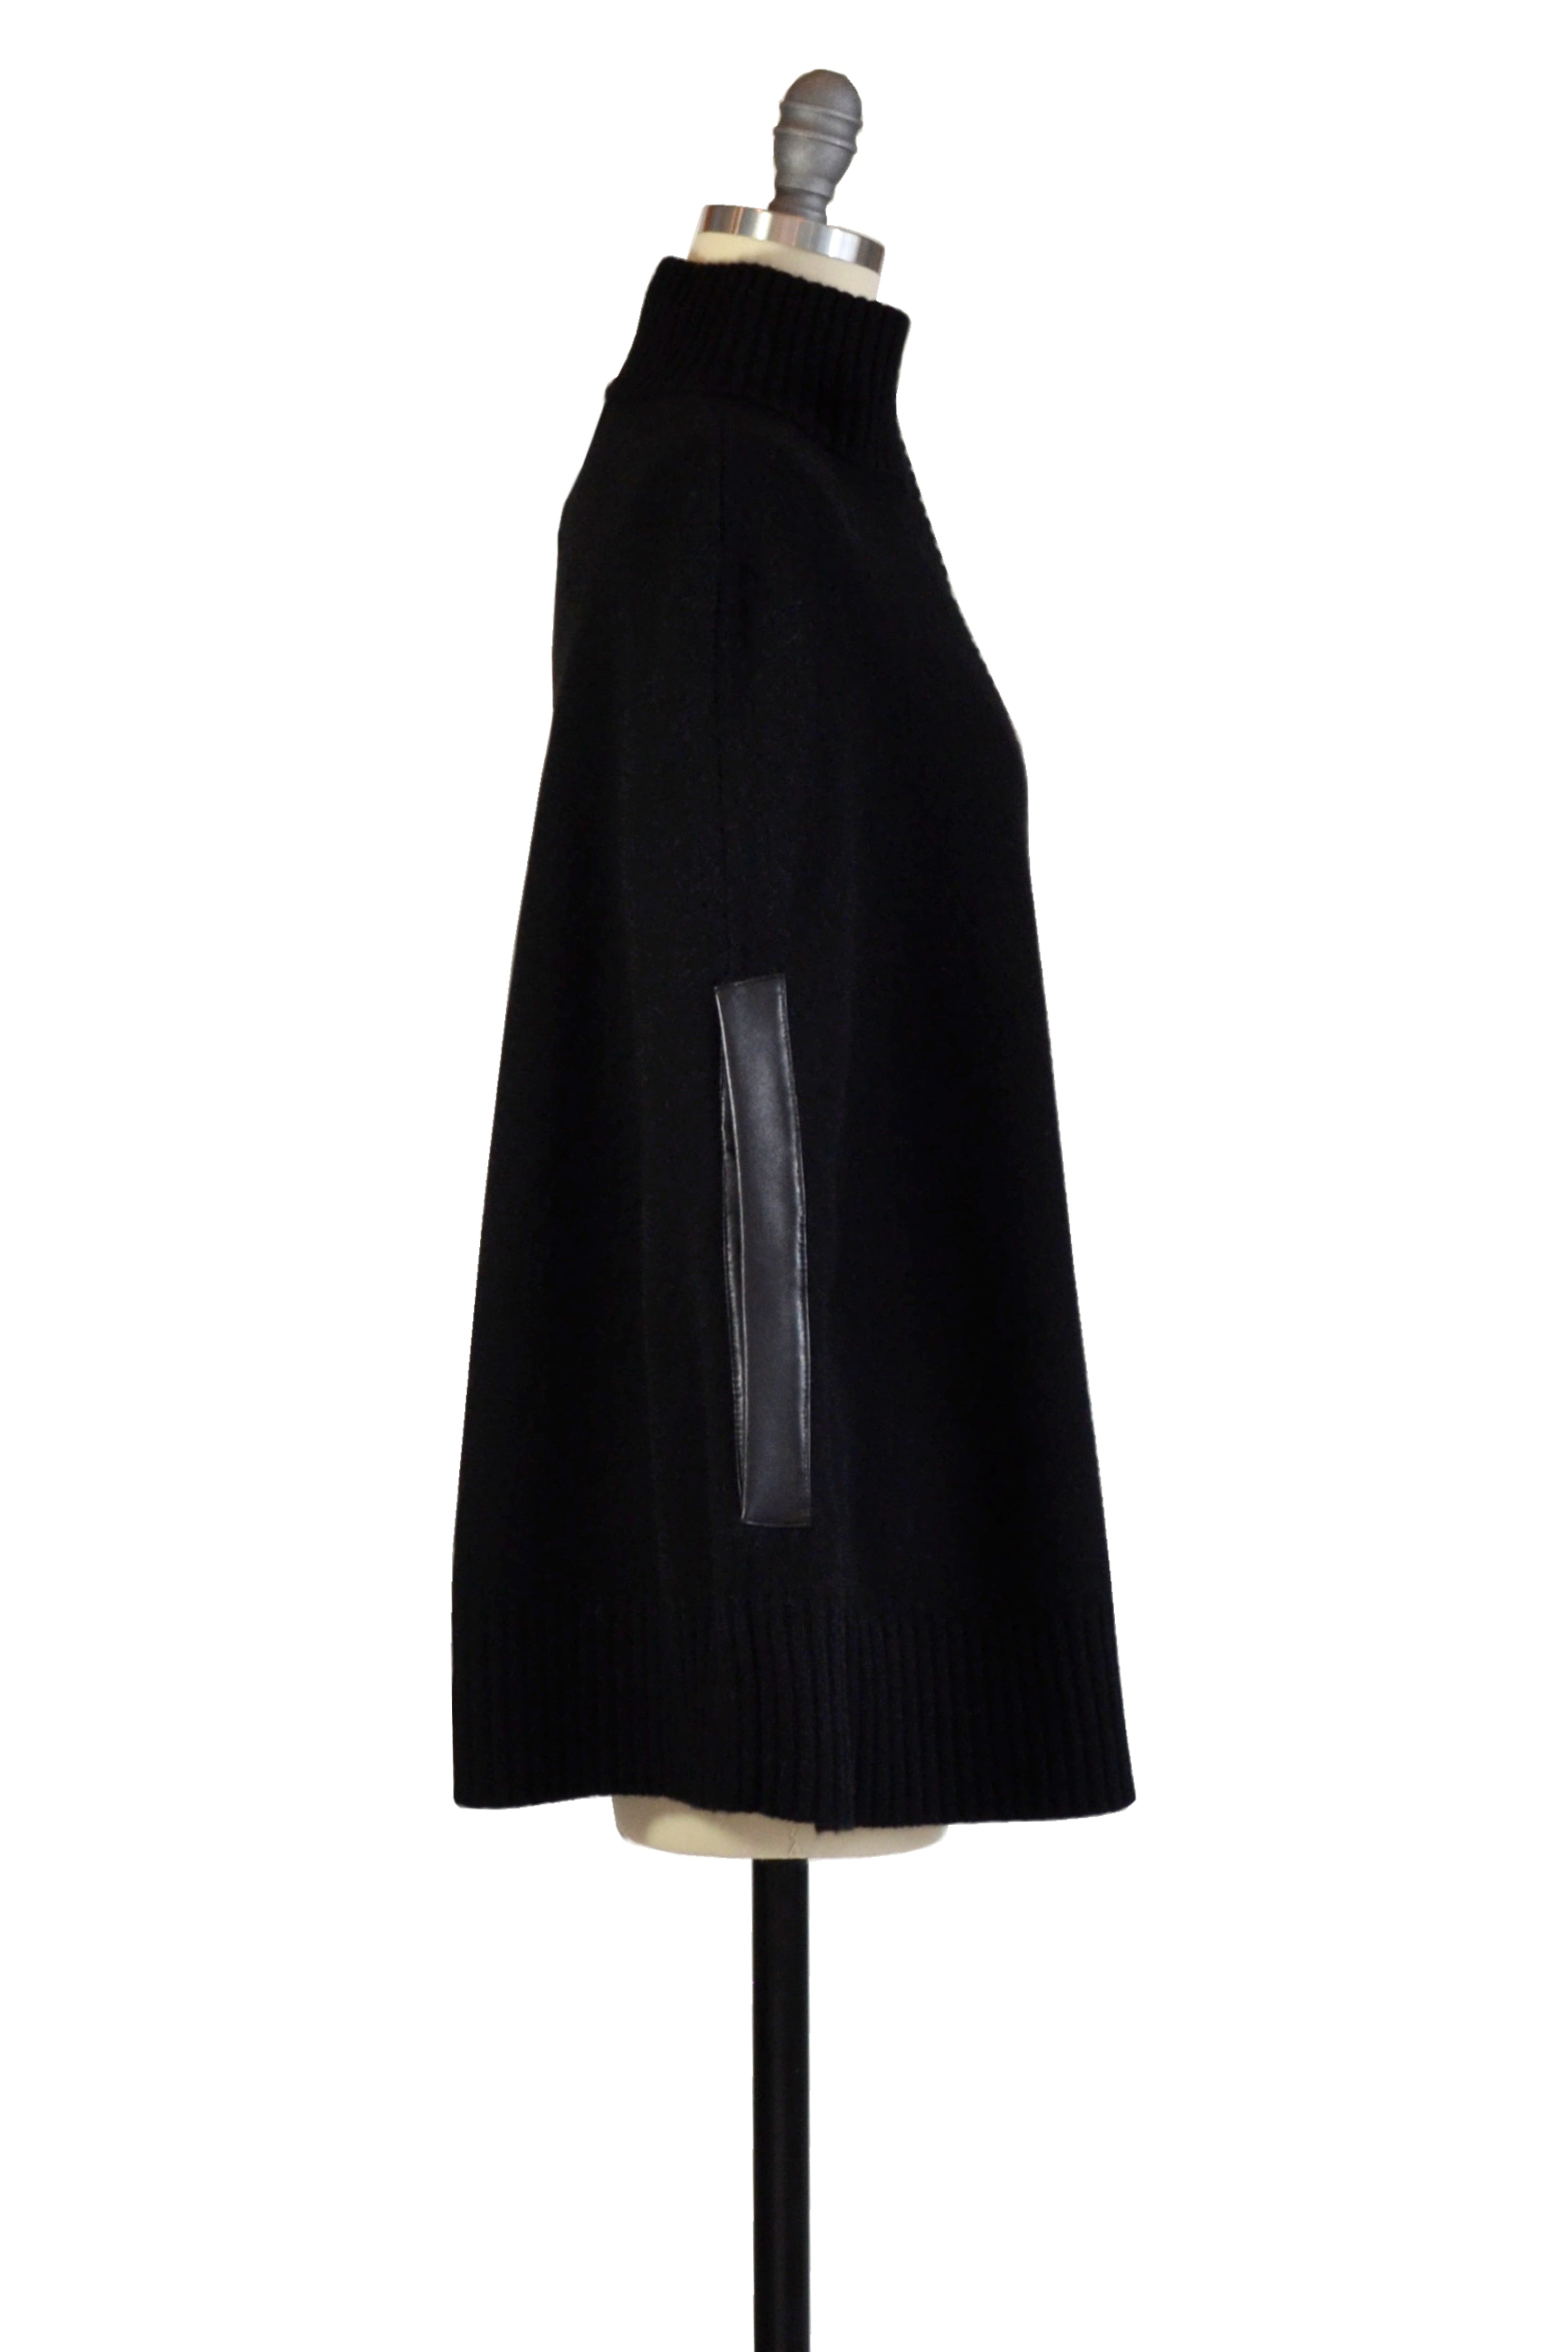 Cashmere Swing Poncho with Leather Trim in Black